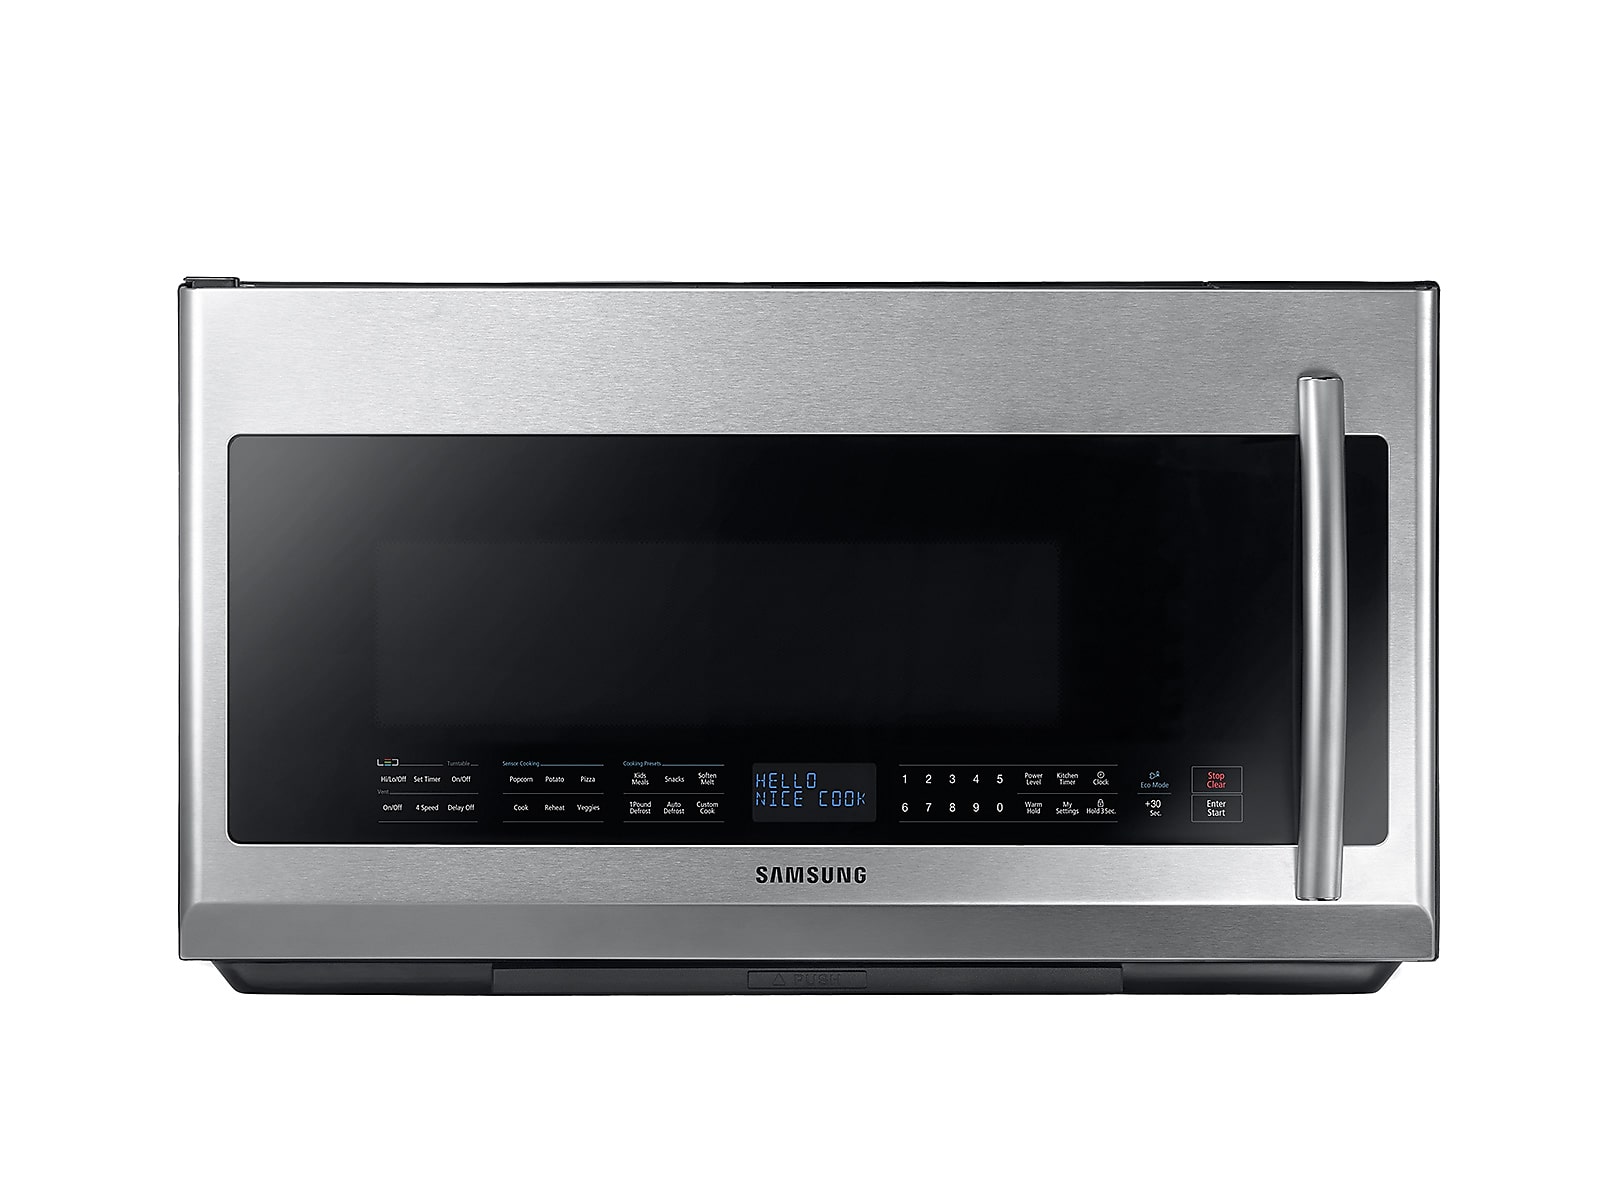 Samsung 2.1 cu. ft. Over-the-Range Microwave with Sensor Cooking in Silver(ME21F707MJT/AA) photo